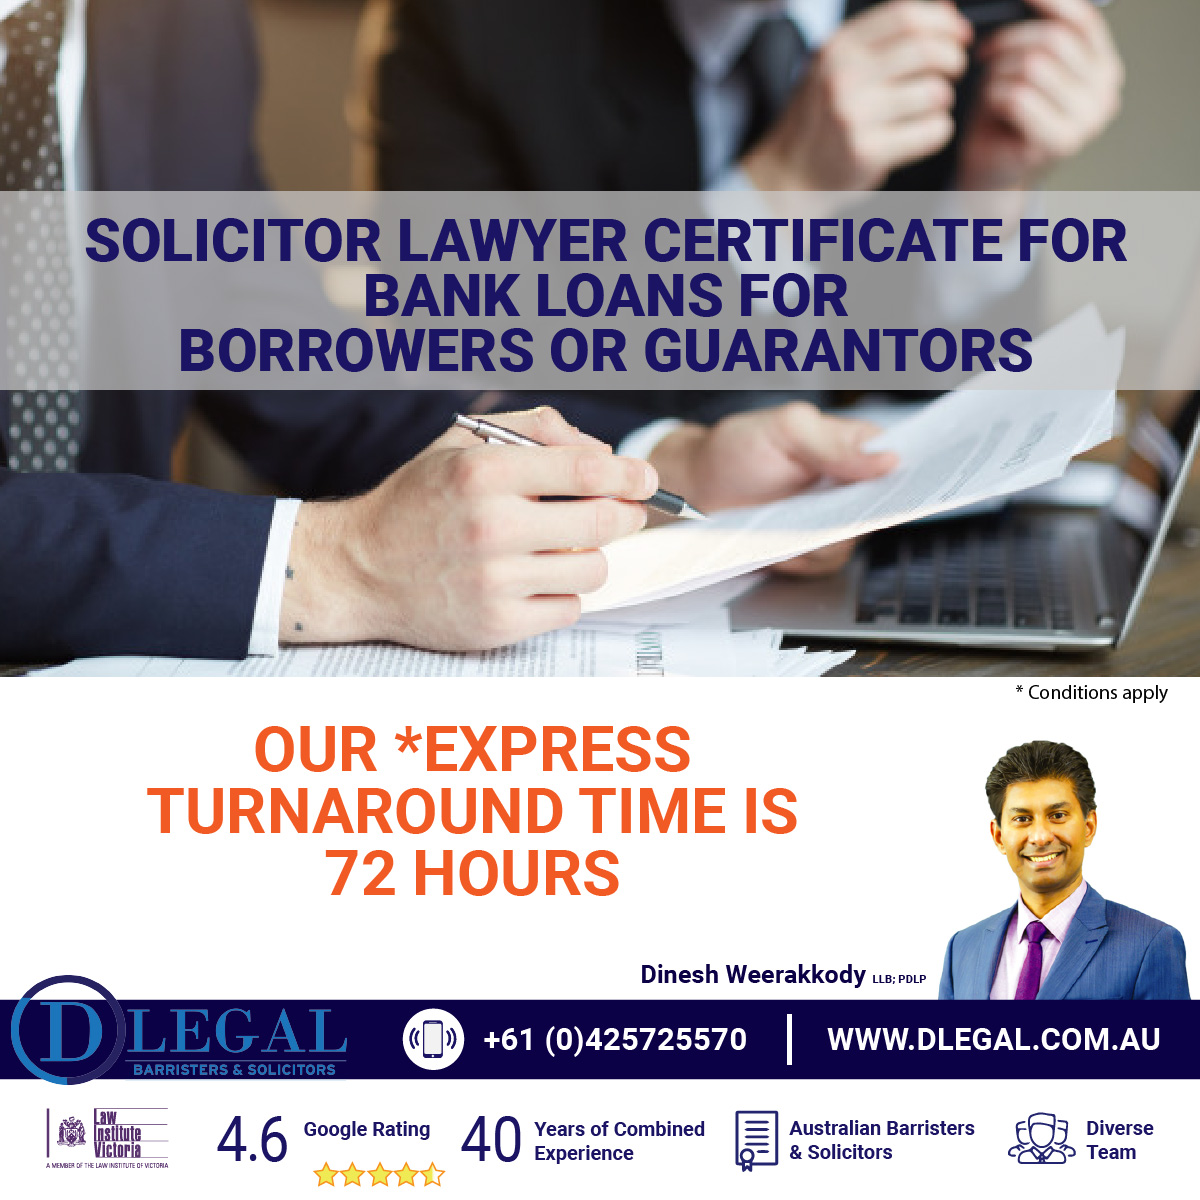 Solicitor Lawyer Certificate bank loans Direct Borrower Guarantor Australian Legal Practitioner Certificate